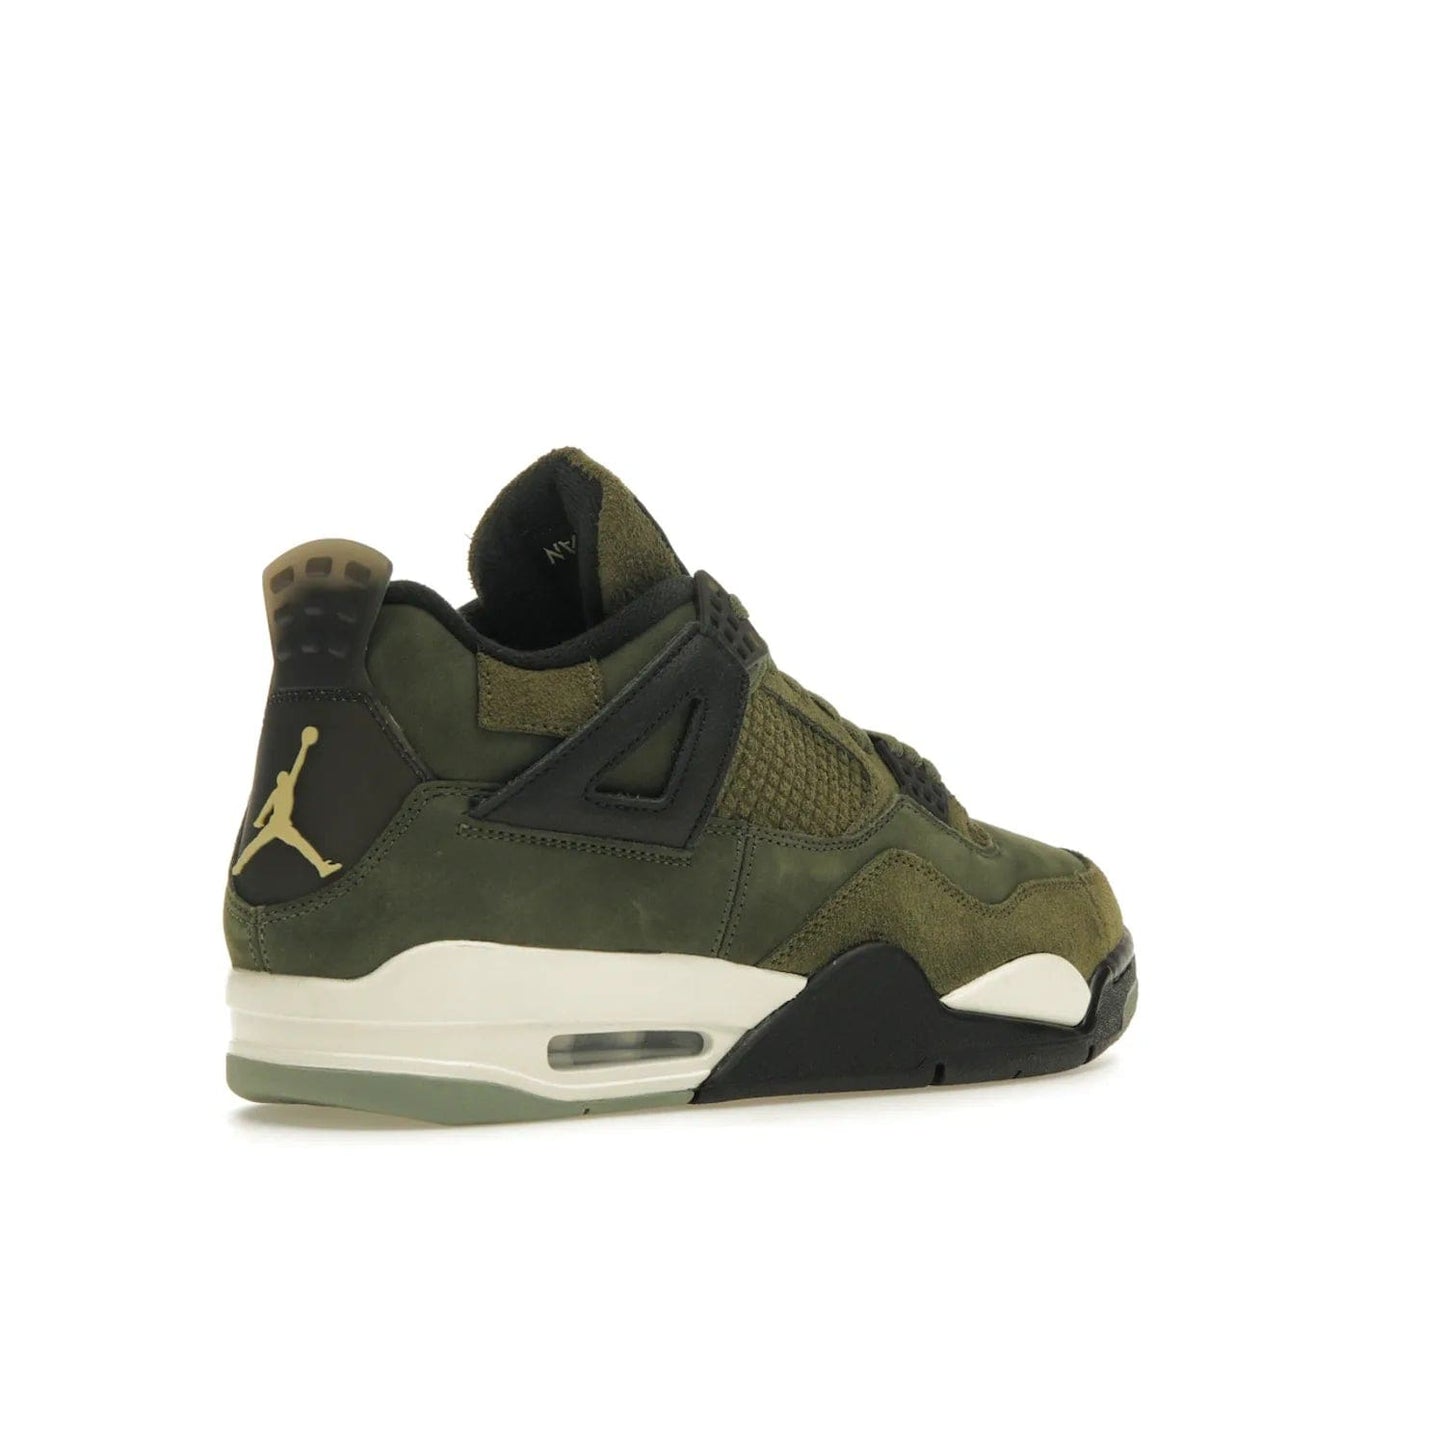 Jordan 4 Retro SE Craft Medium Olive - Image 33 - Only at www.BallersClubKickz.com - Grab the Jordan 4 Retro SE Crafts for a unique style. Combines Medium Olive, Pale Vanilla, Khaki, Black and Sail, with same classic shape, cushioning, and rubber outsole. Available on November 18th!